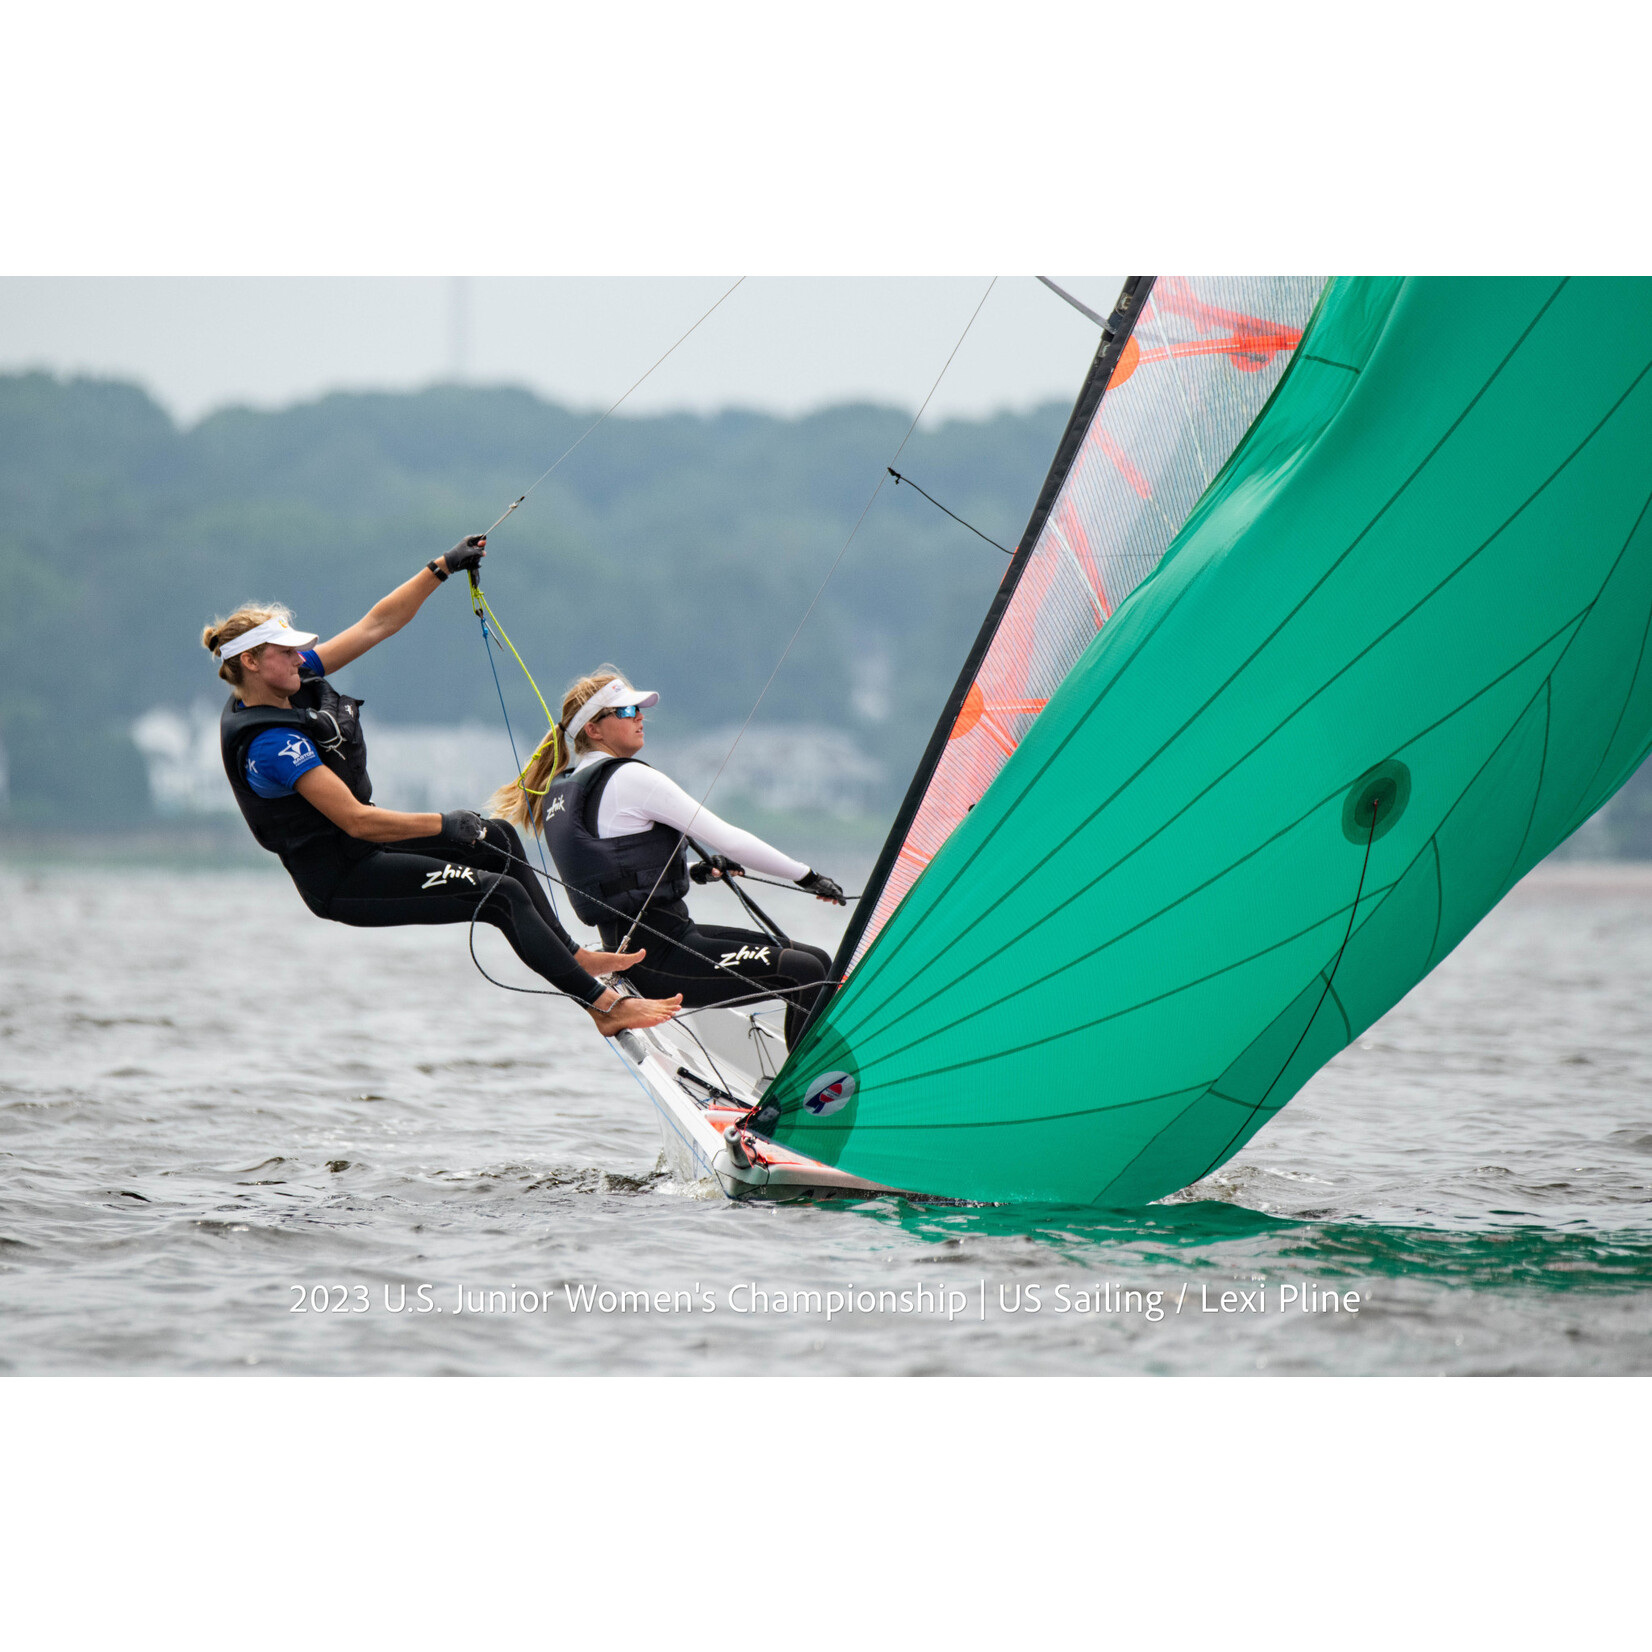 Gift Catalog Donation Support Youth Competition: Charter boats for a first-time team at Youth Champs